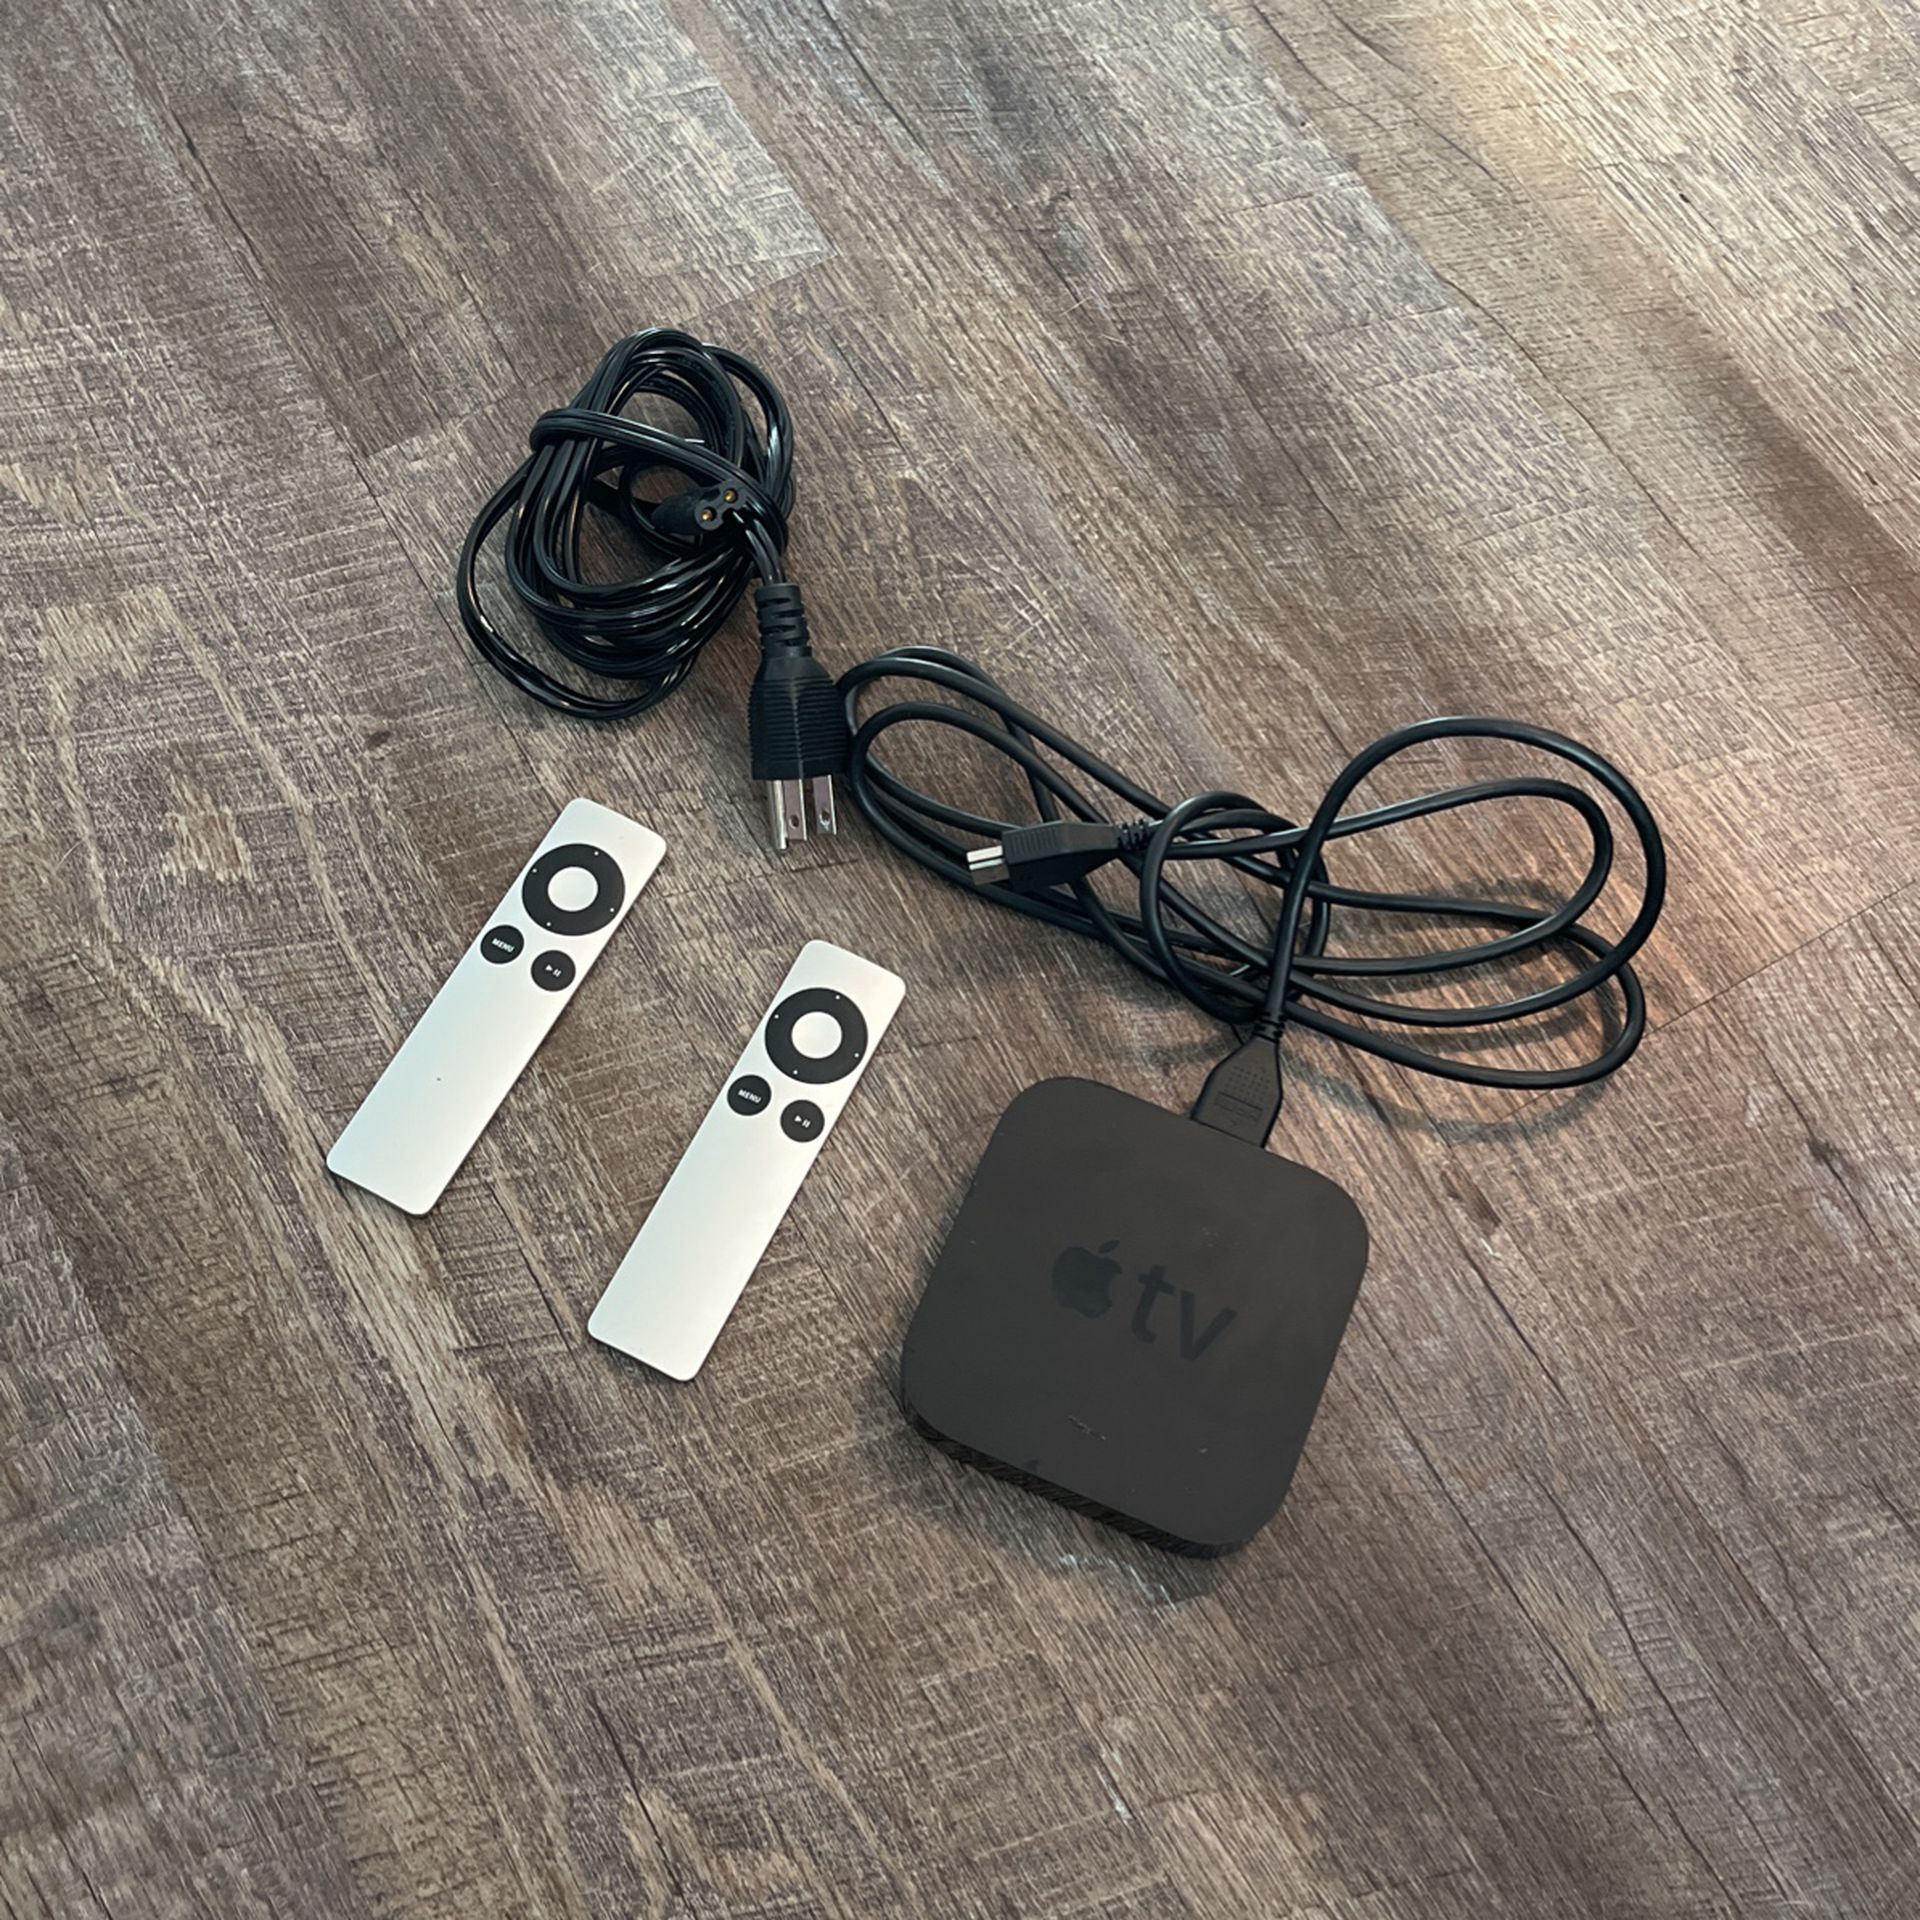 Apple TV With Two Remotes 